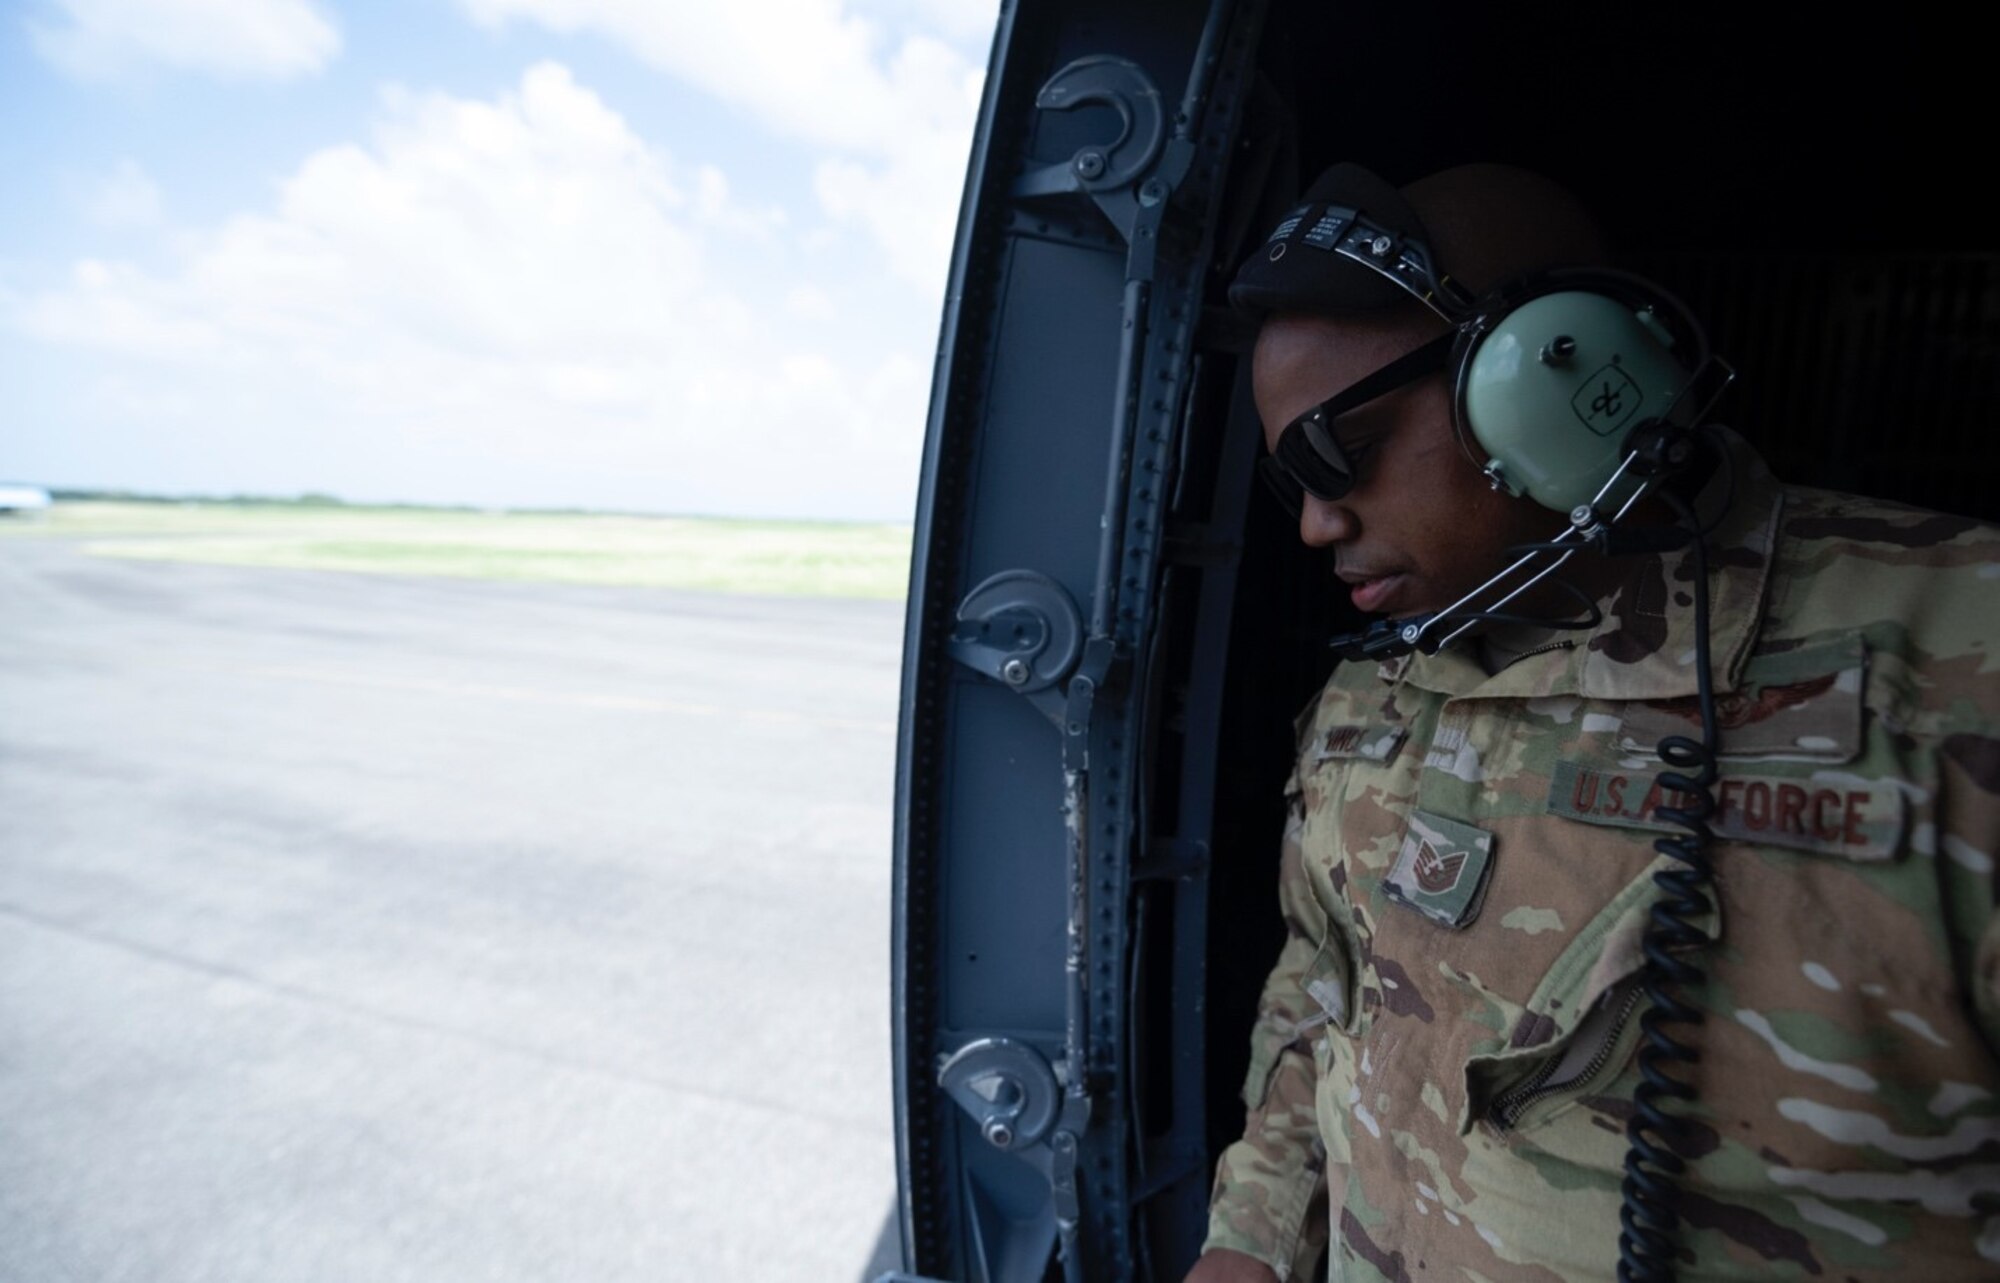 A uniformed Airman in sunglasses looks out an open compartment